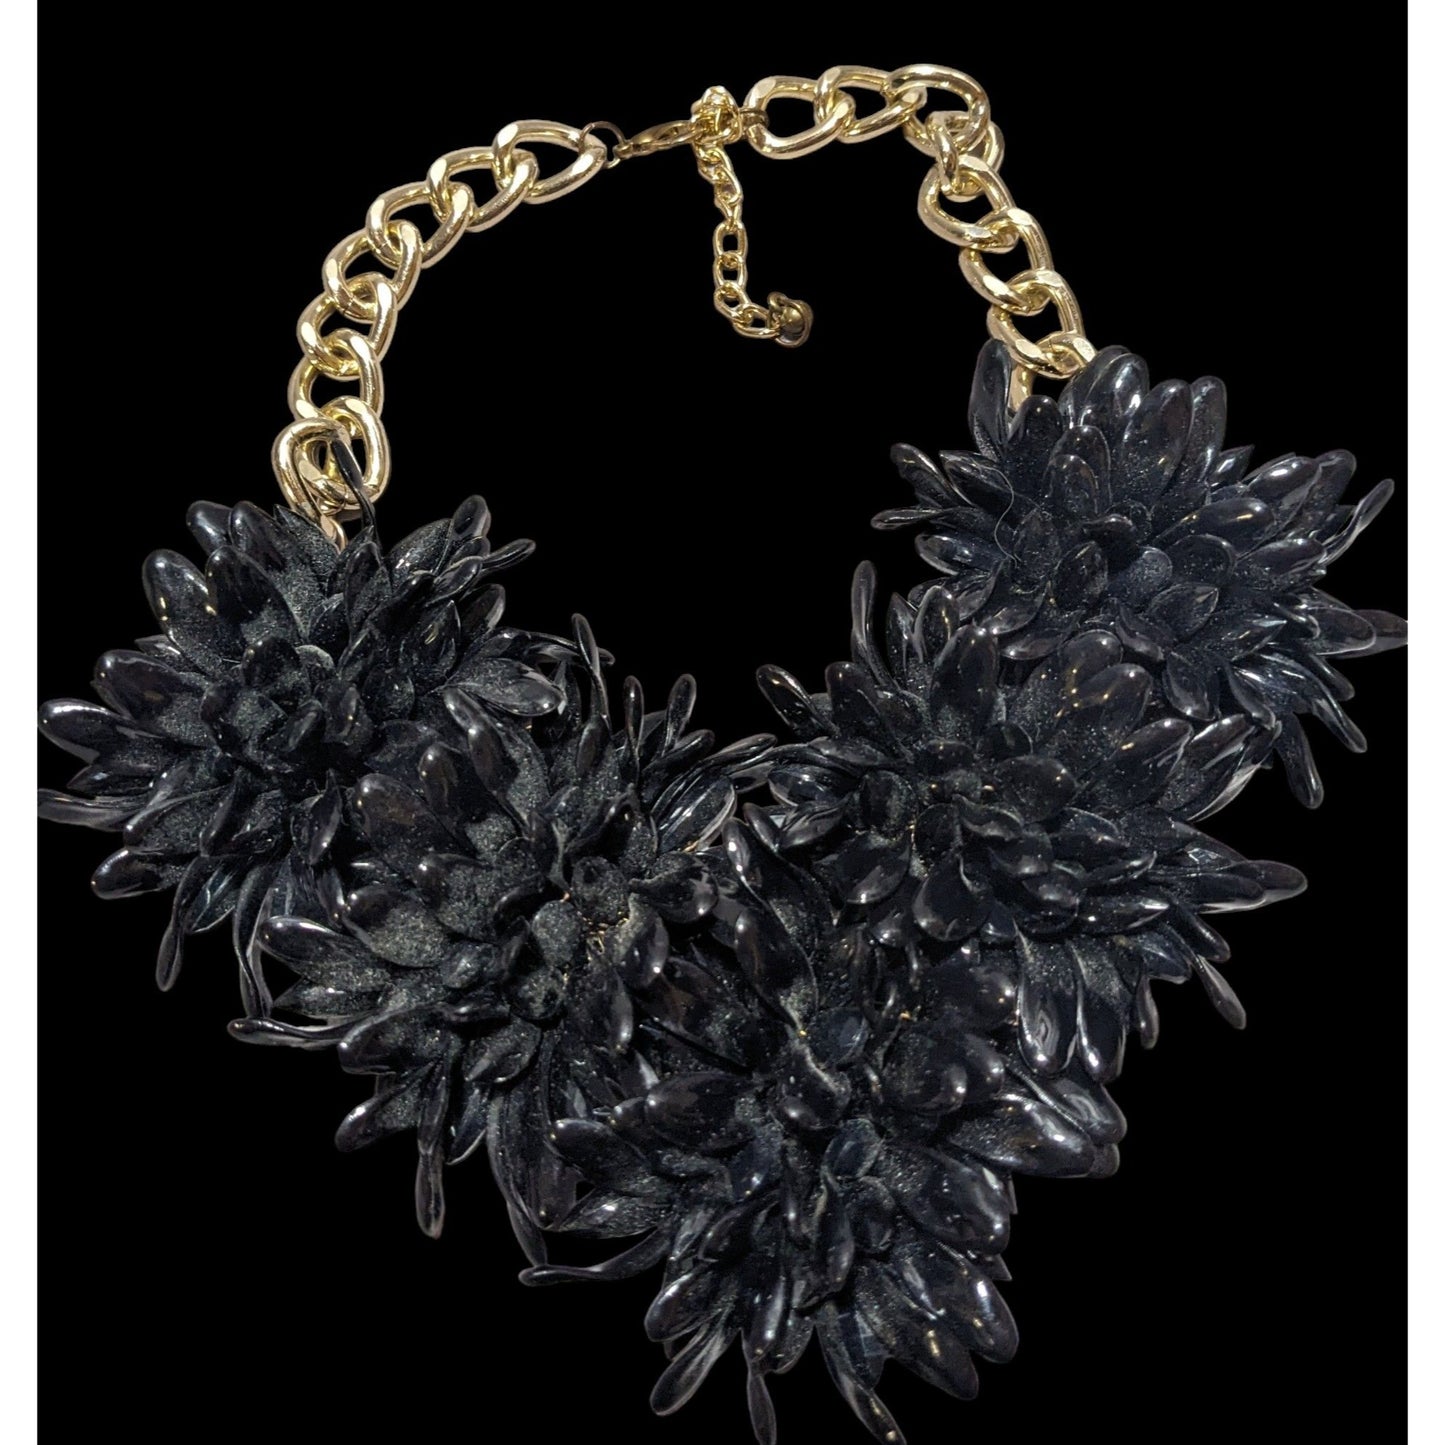 Chunky Black Floral Necklace